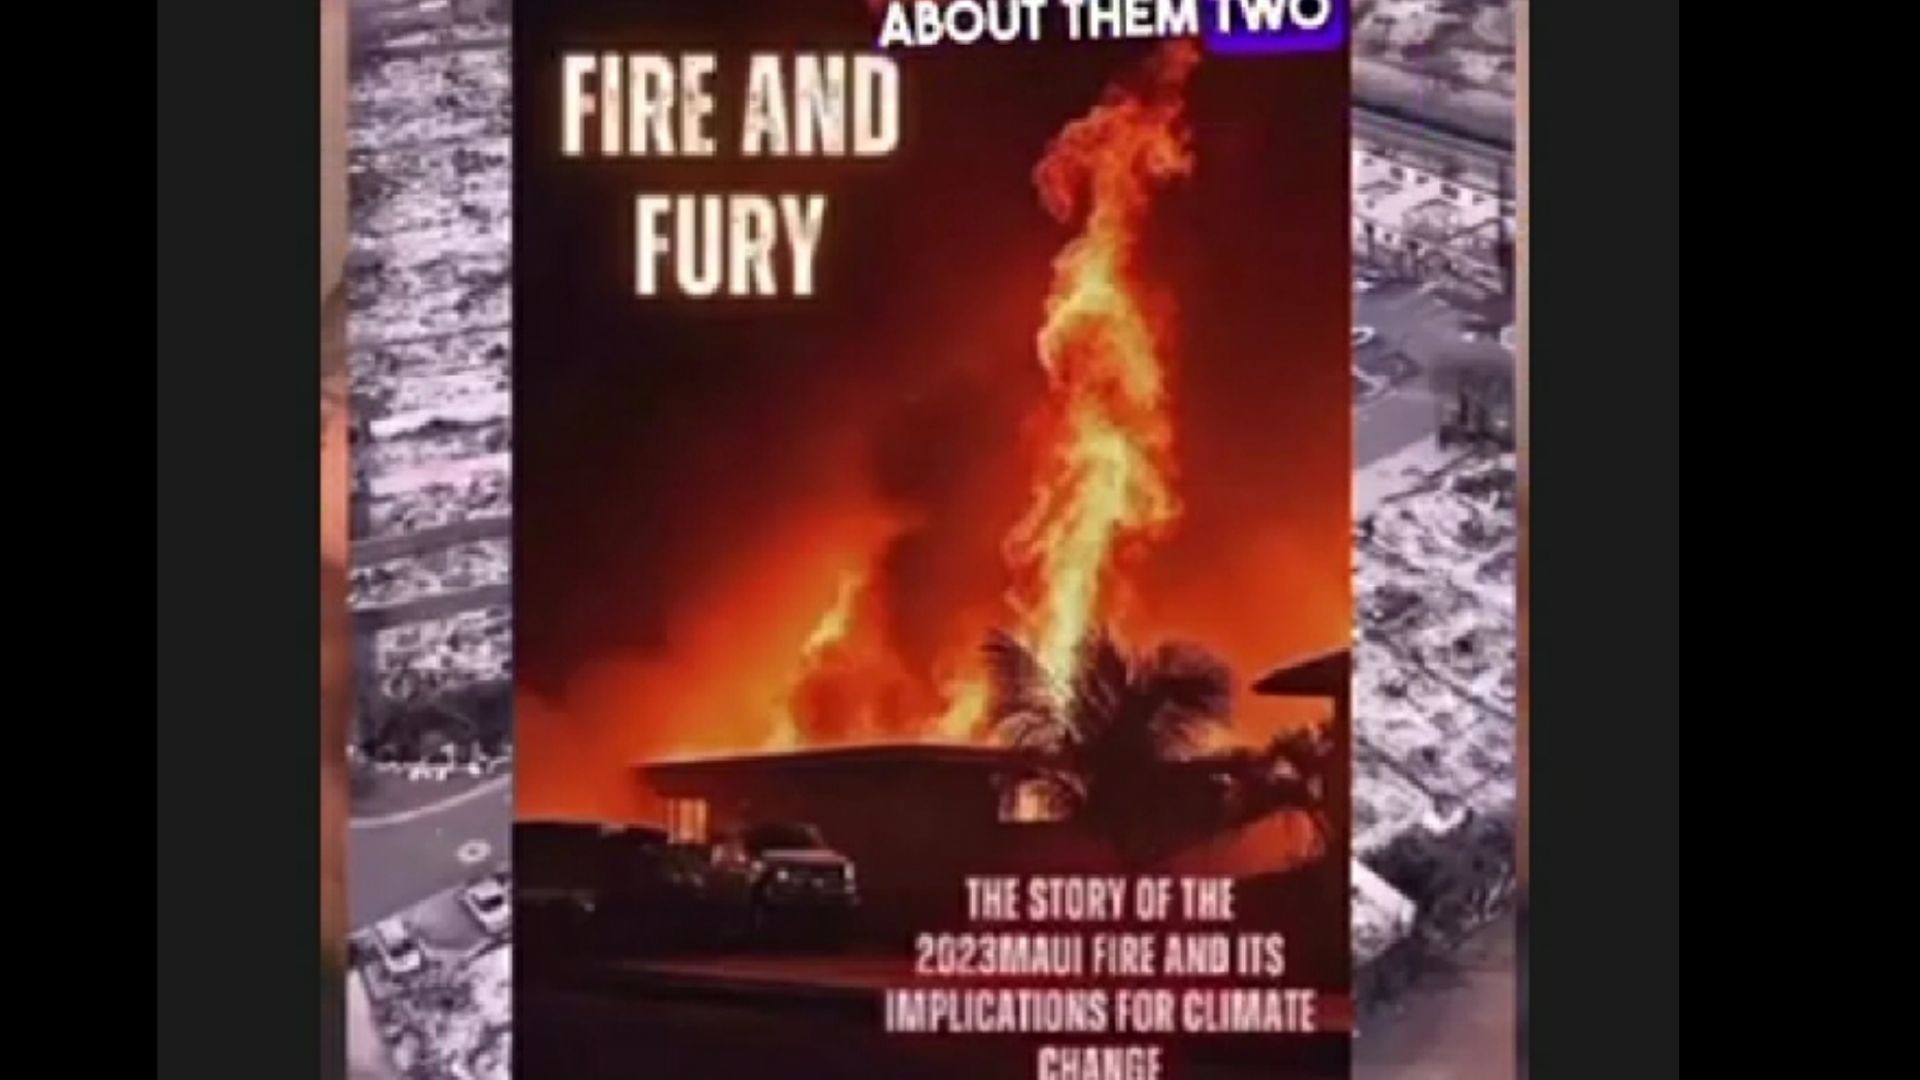 The Book  "Fire and Fury"